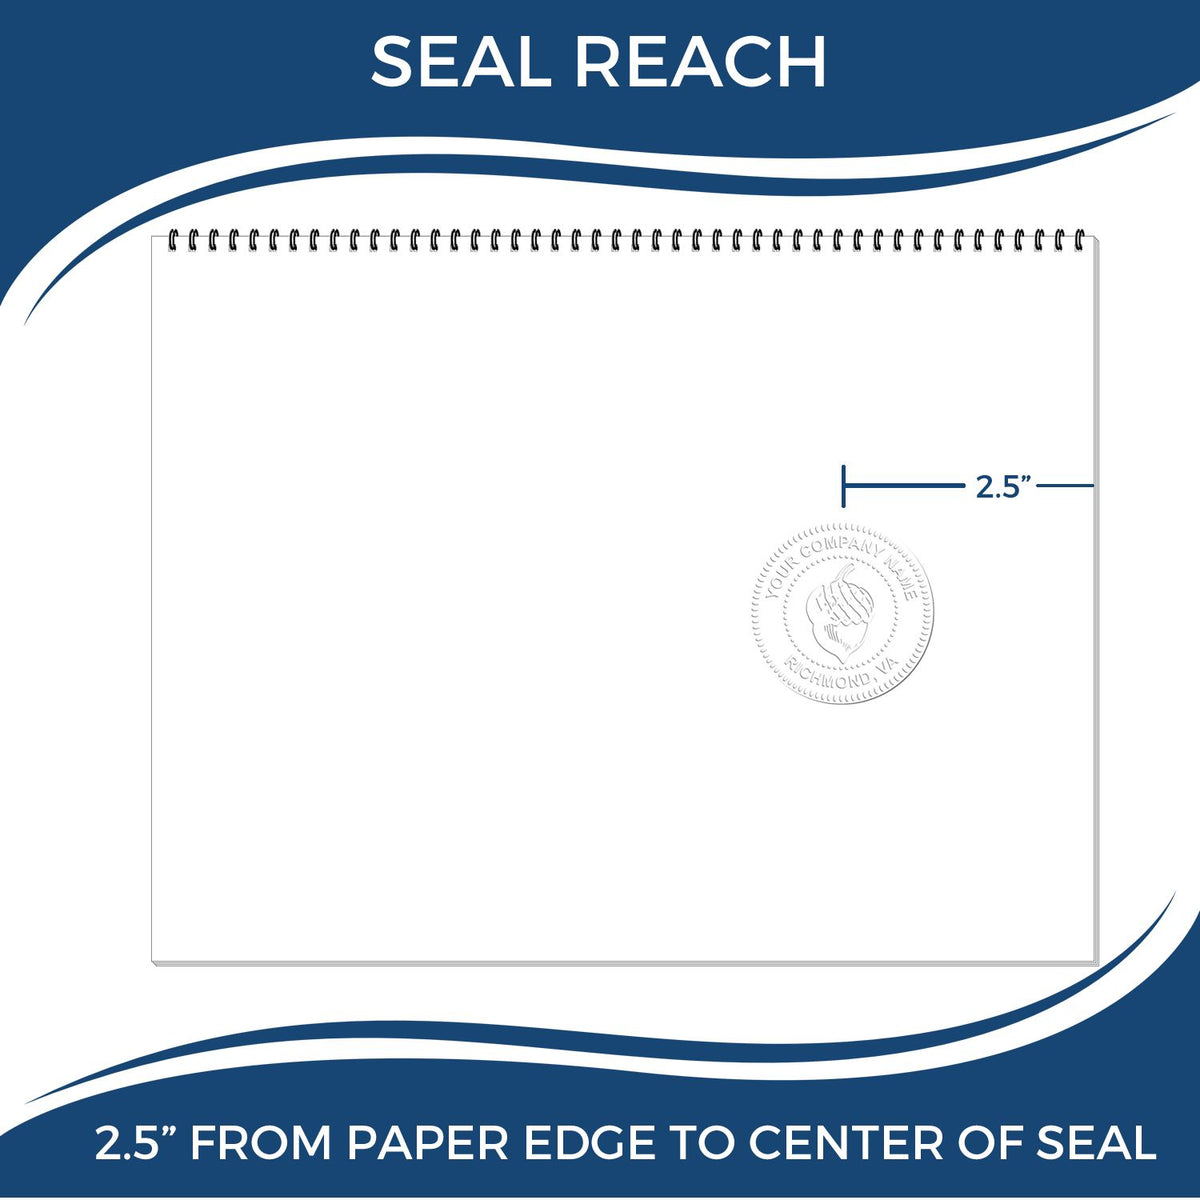 An infographic showing the seal reach which is represented by a ruler and a miniature seal image of the Long Reach New Hampshire Geology Seal